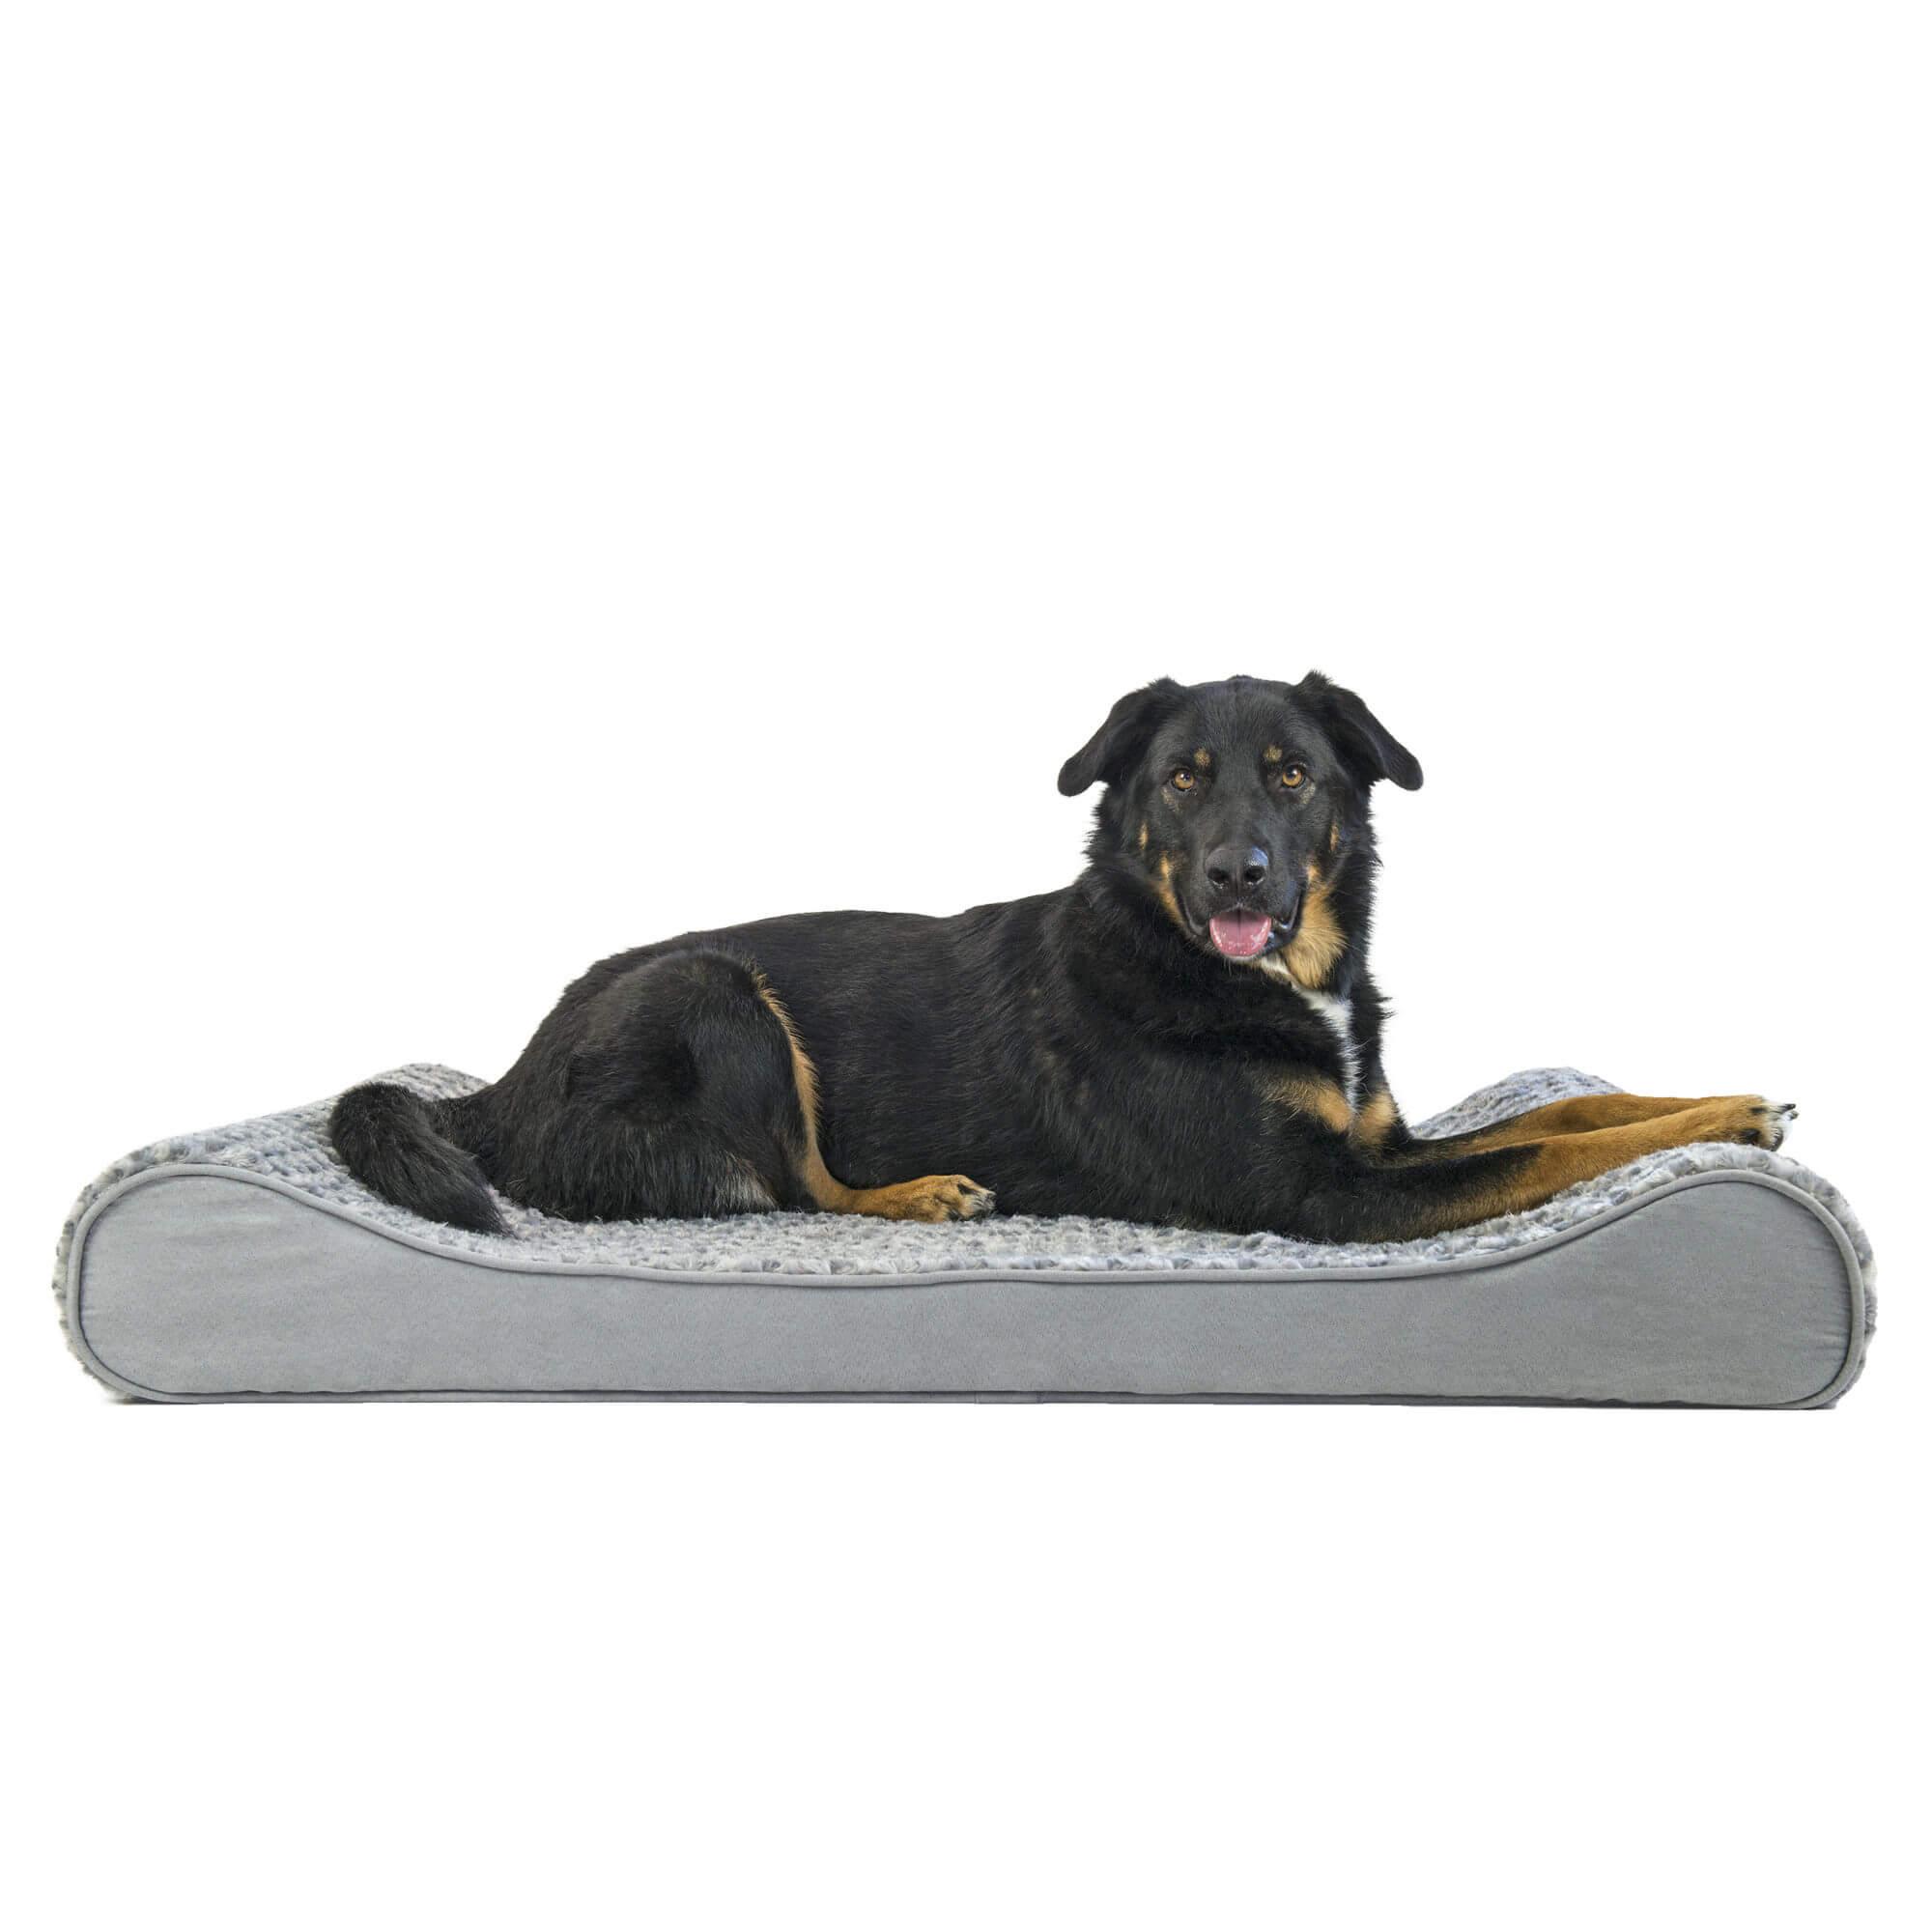 Furhaven Ultra Plush Luxe Lounger Orthopedic Pet Bed - Gray